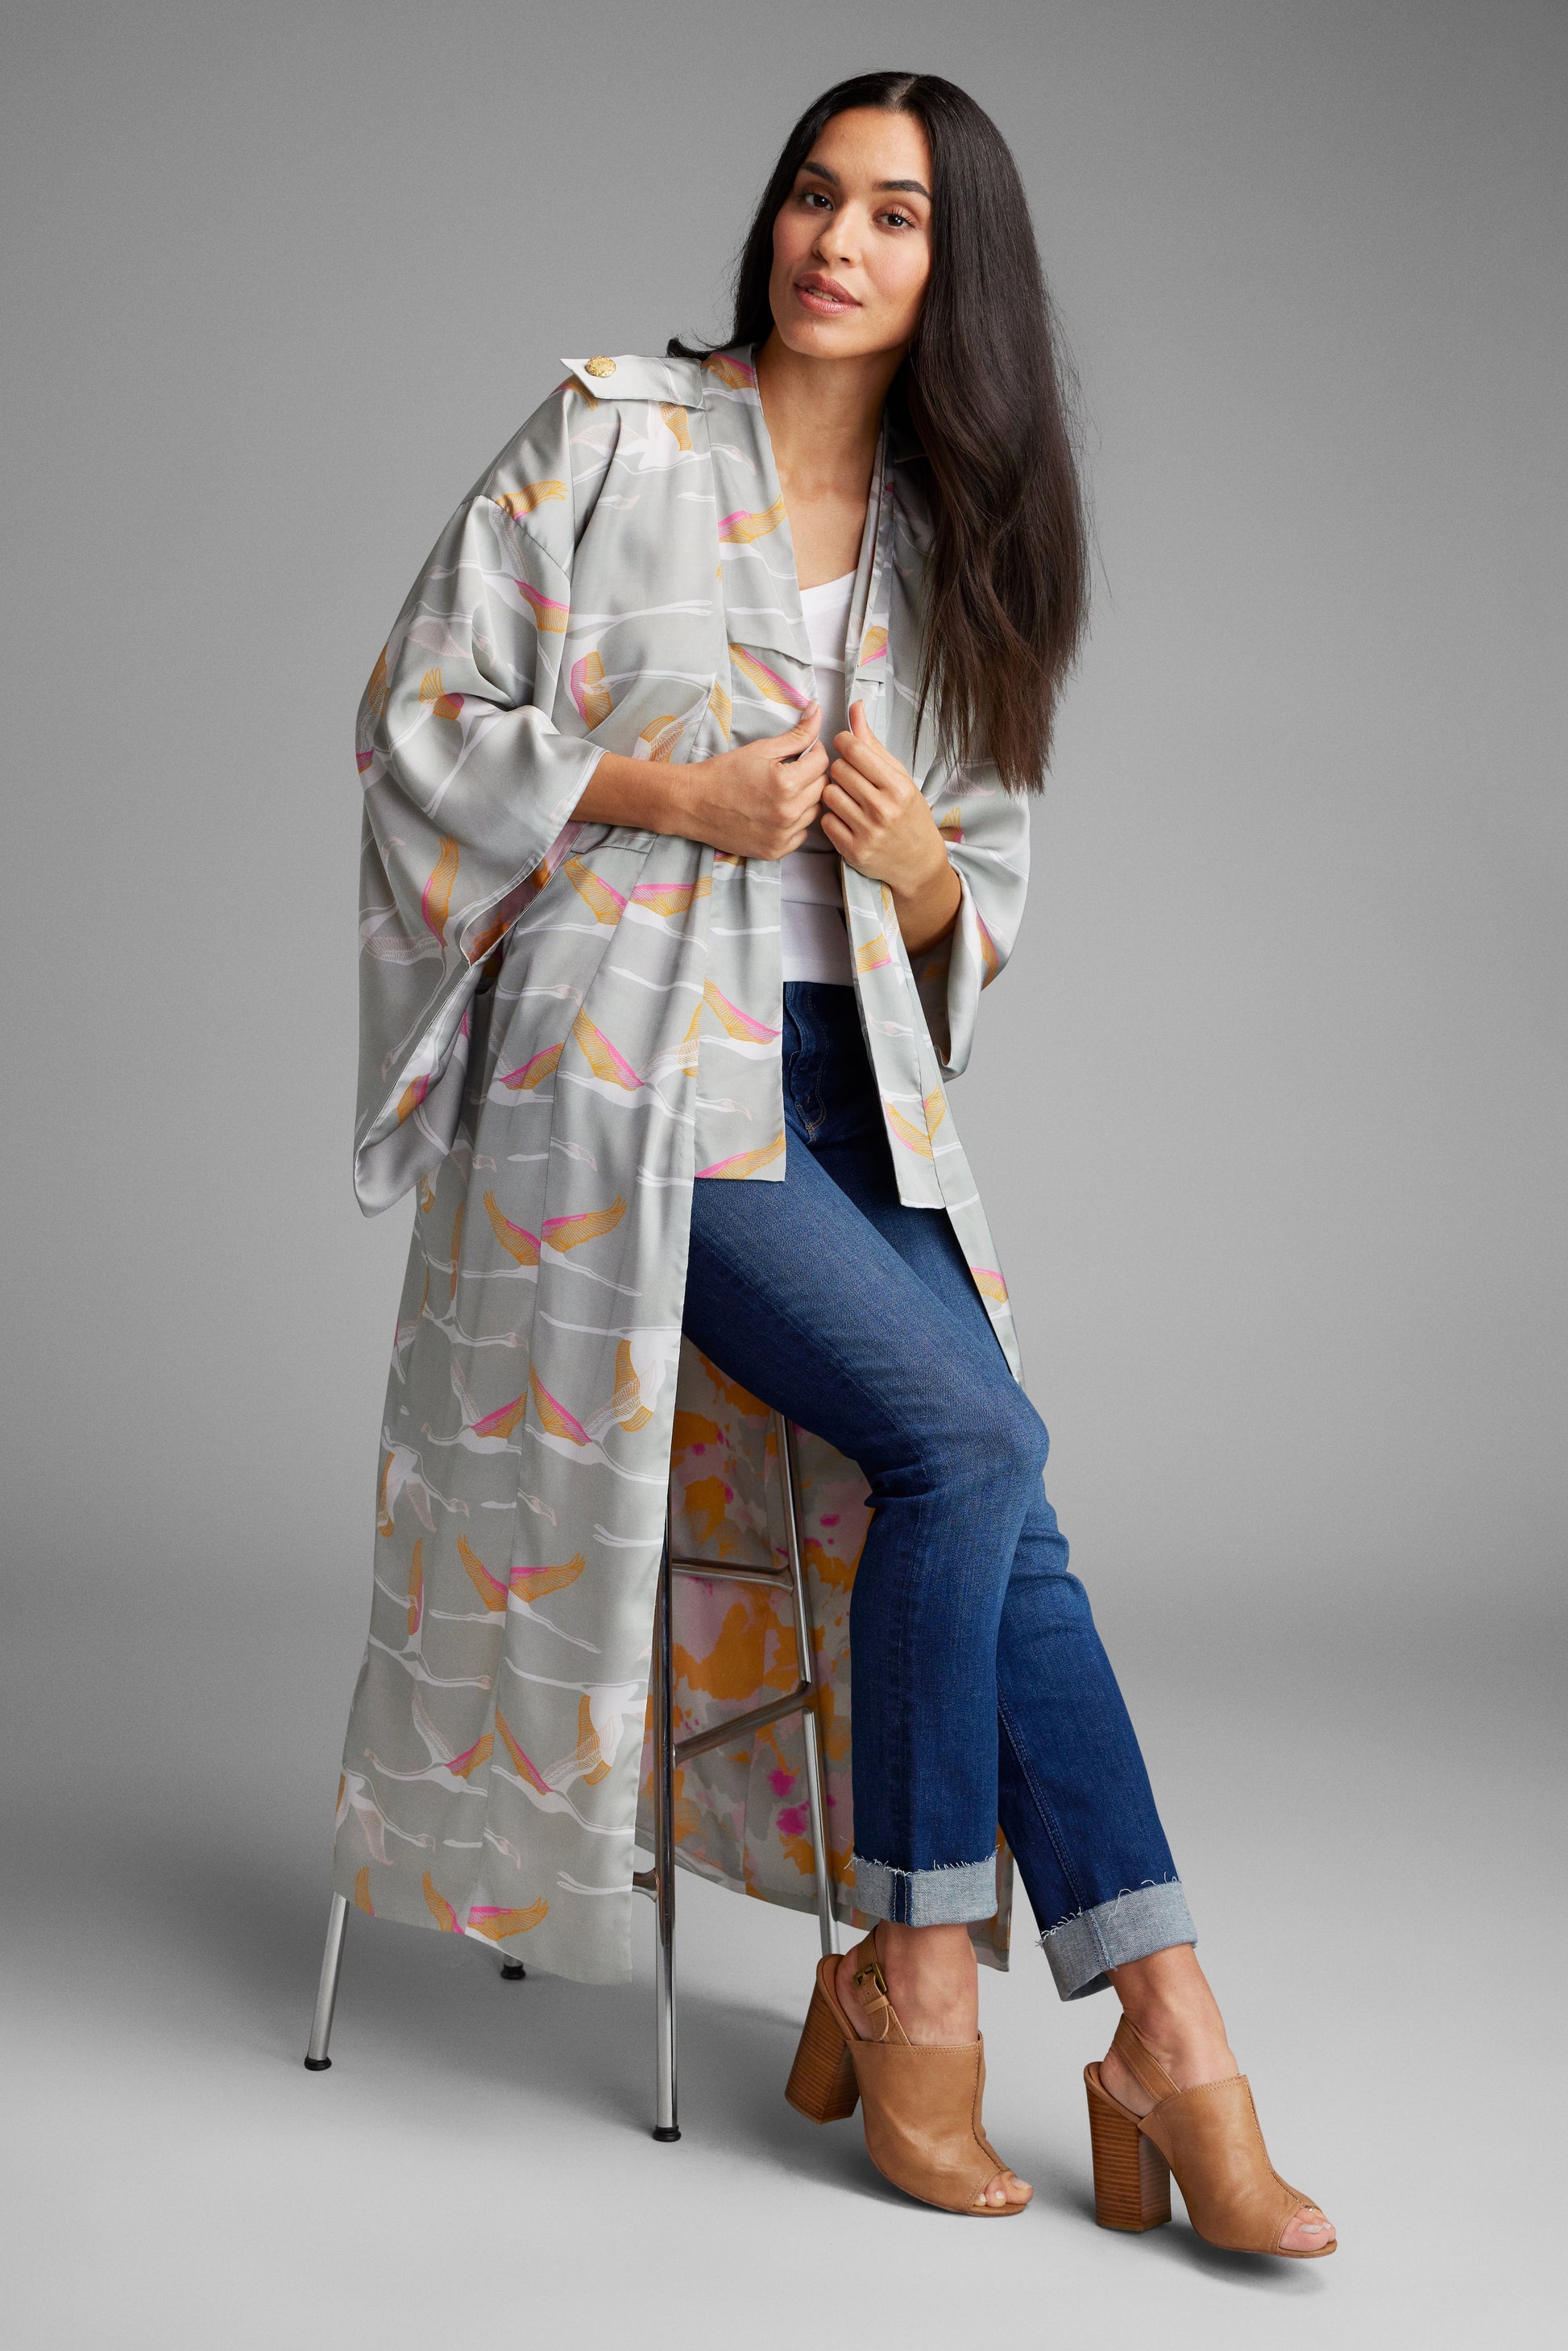 Woman sitting on a stool wearing a grey and pink colored crane patterned kimono duster made from recycled materials